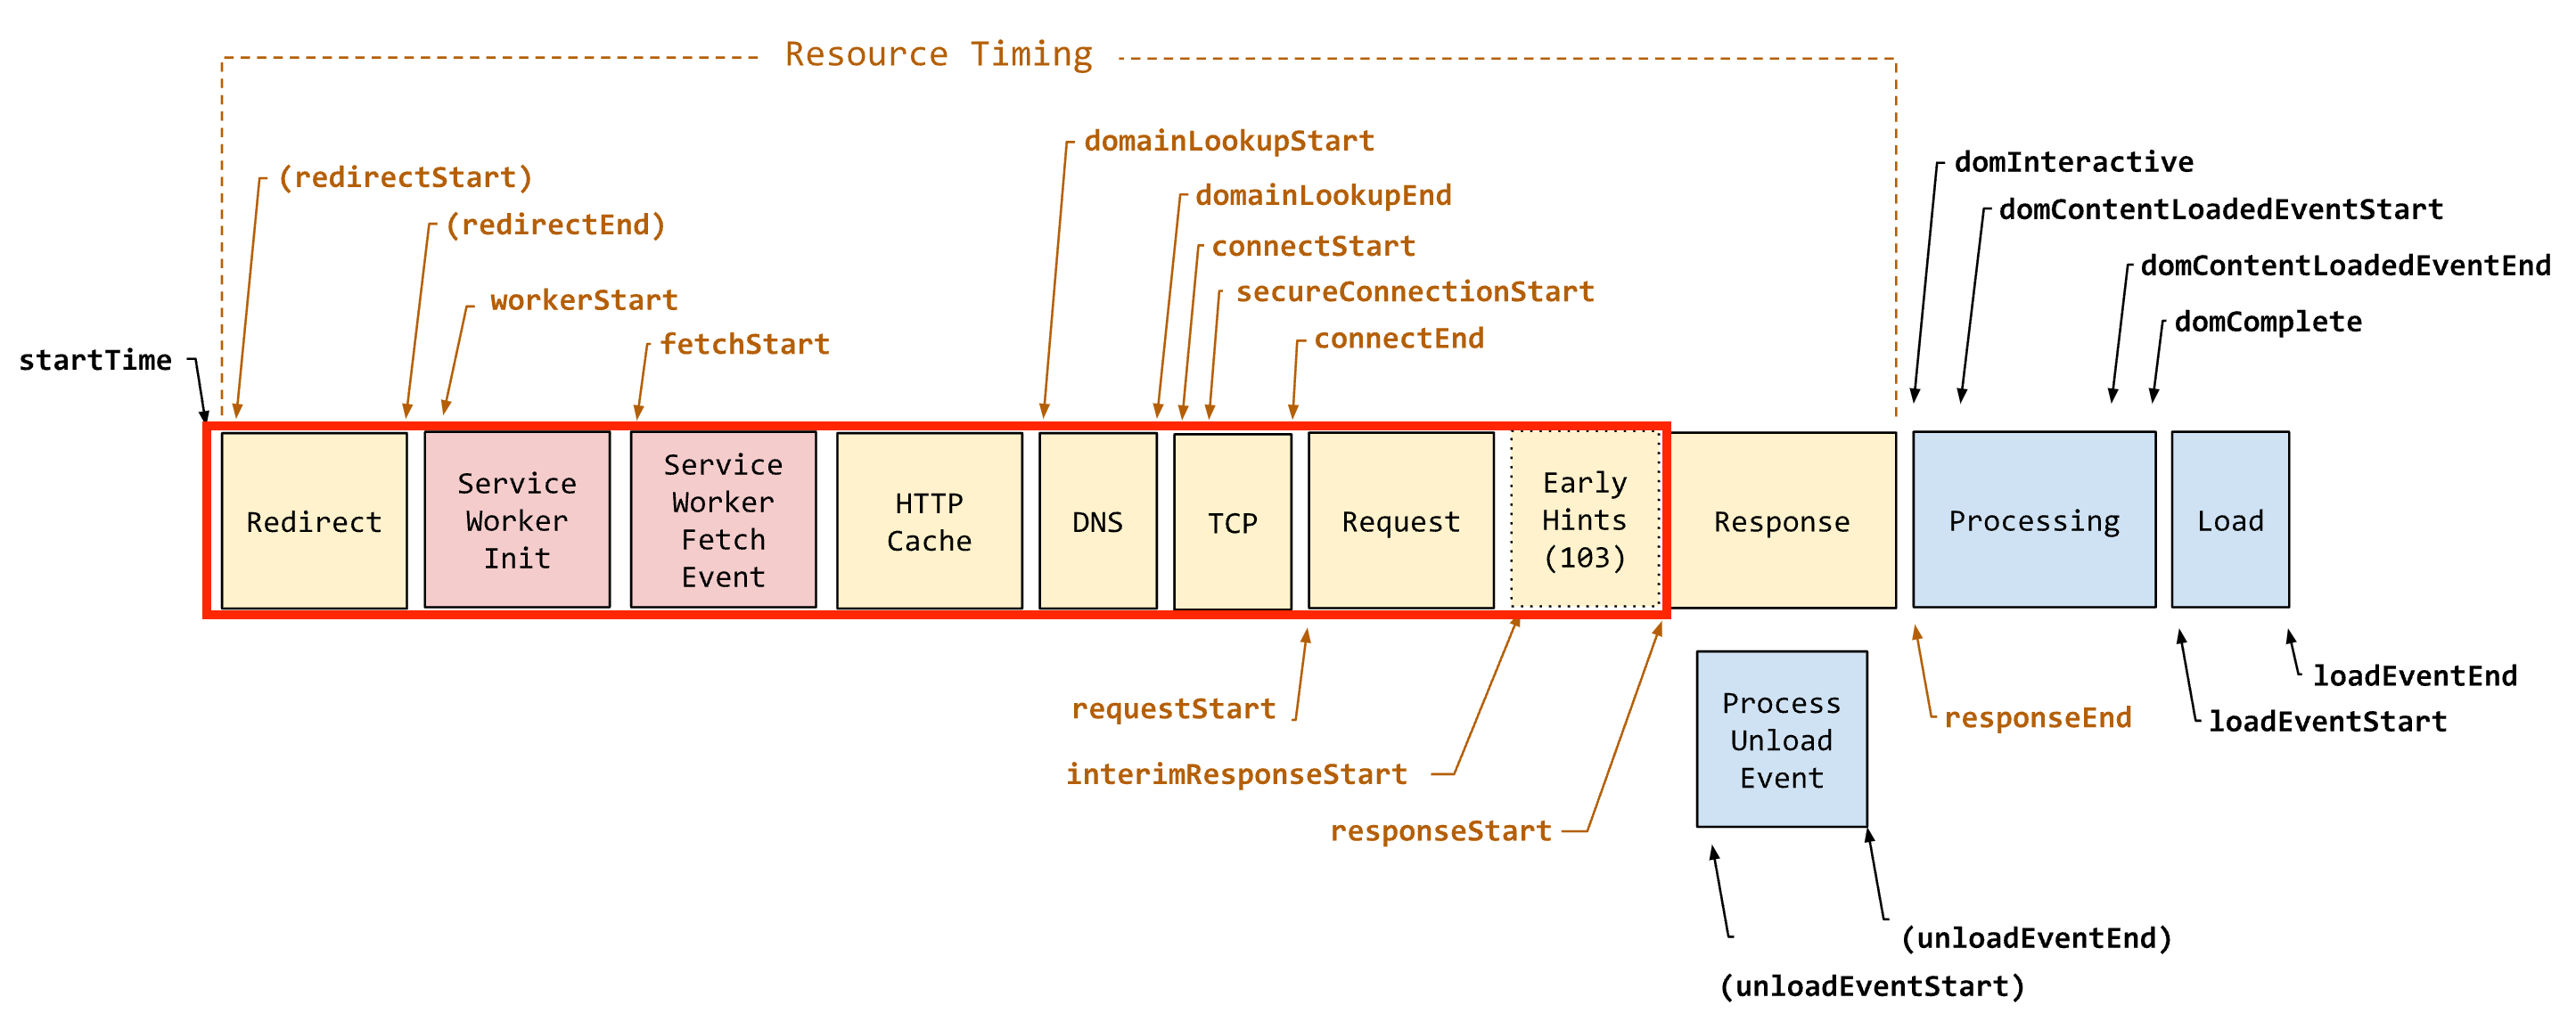 Diagram showing TTFB as the network events from the prompt for unload to the response start